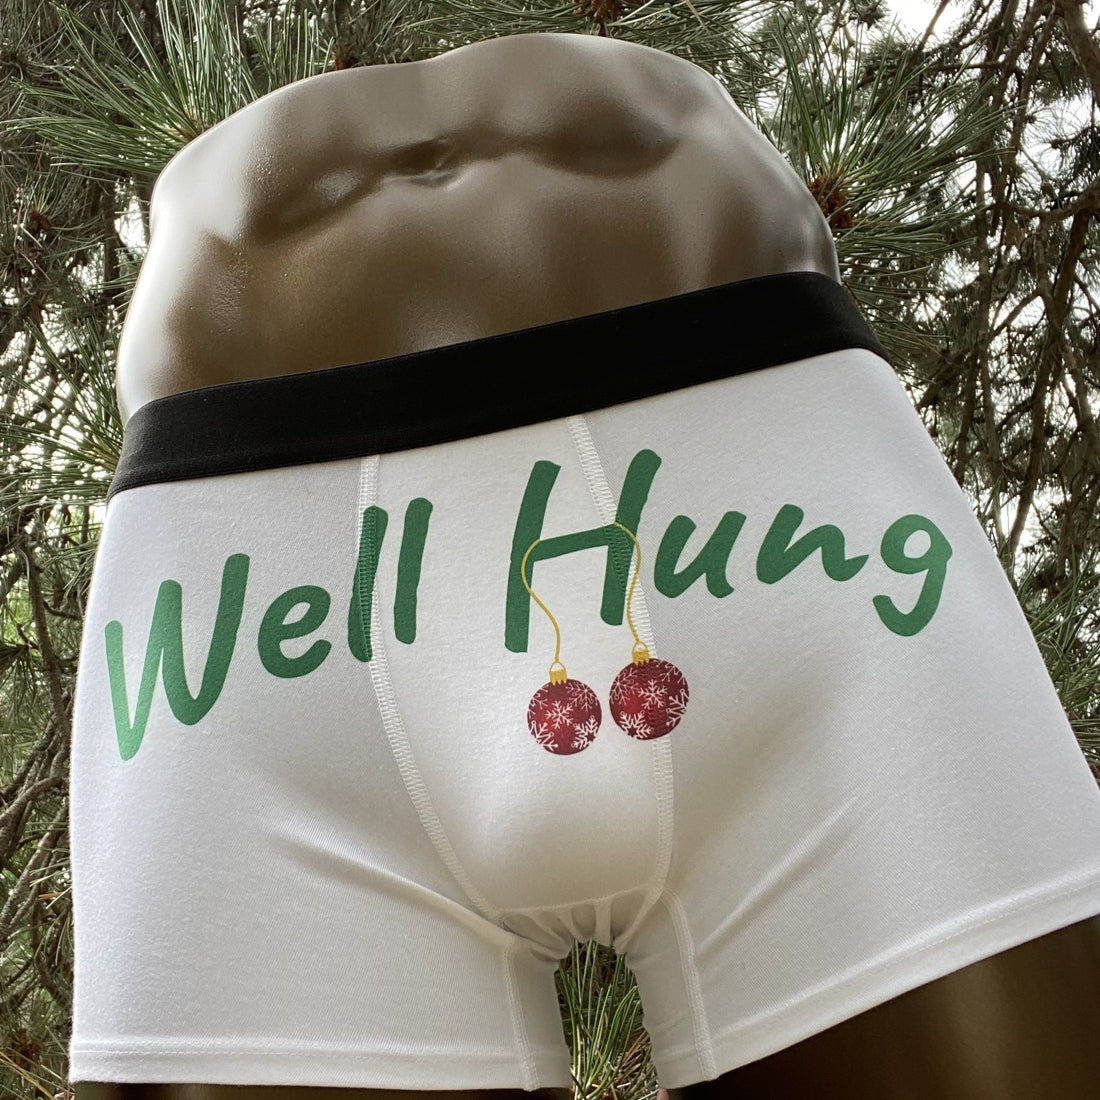 Well Hung | Boxer Briefs